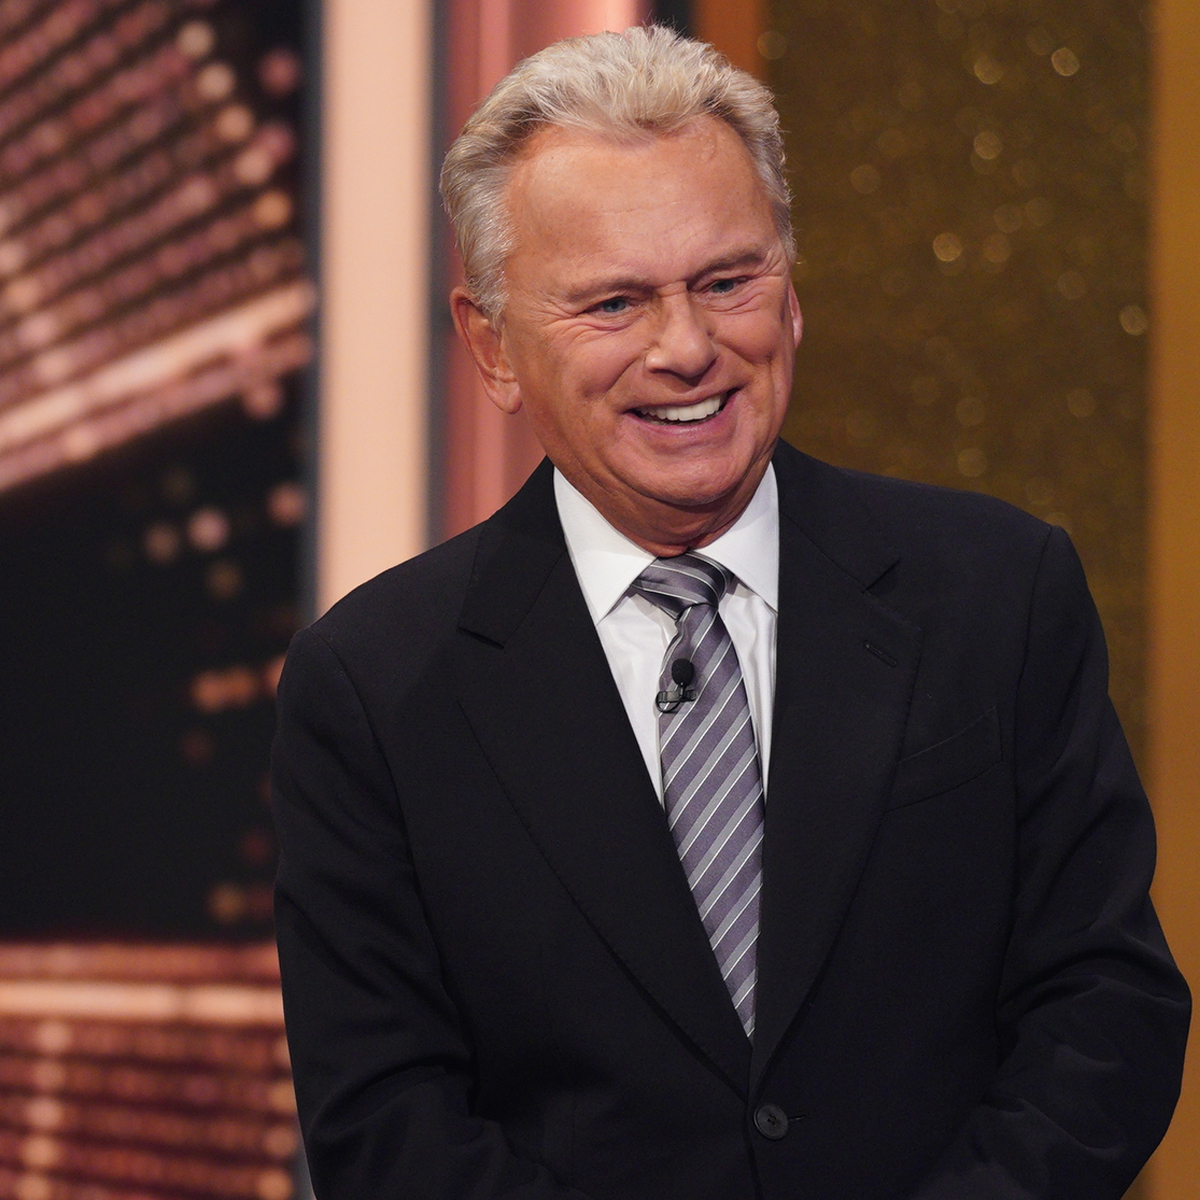 Pat Sajak Leaving Wheel of Fortune After 40 Years